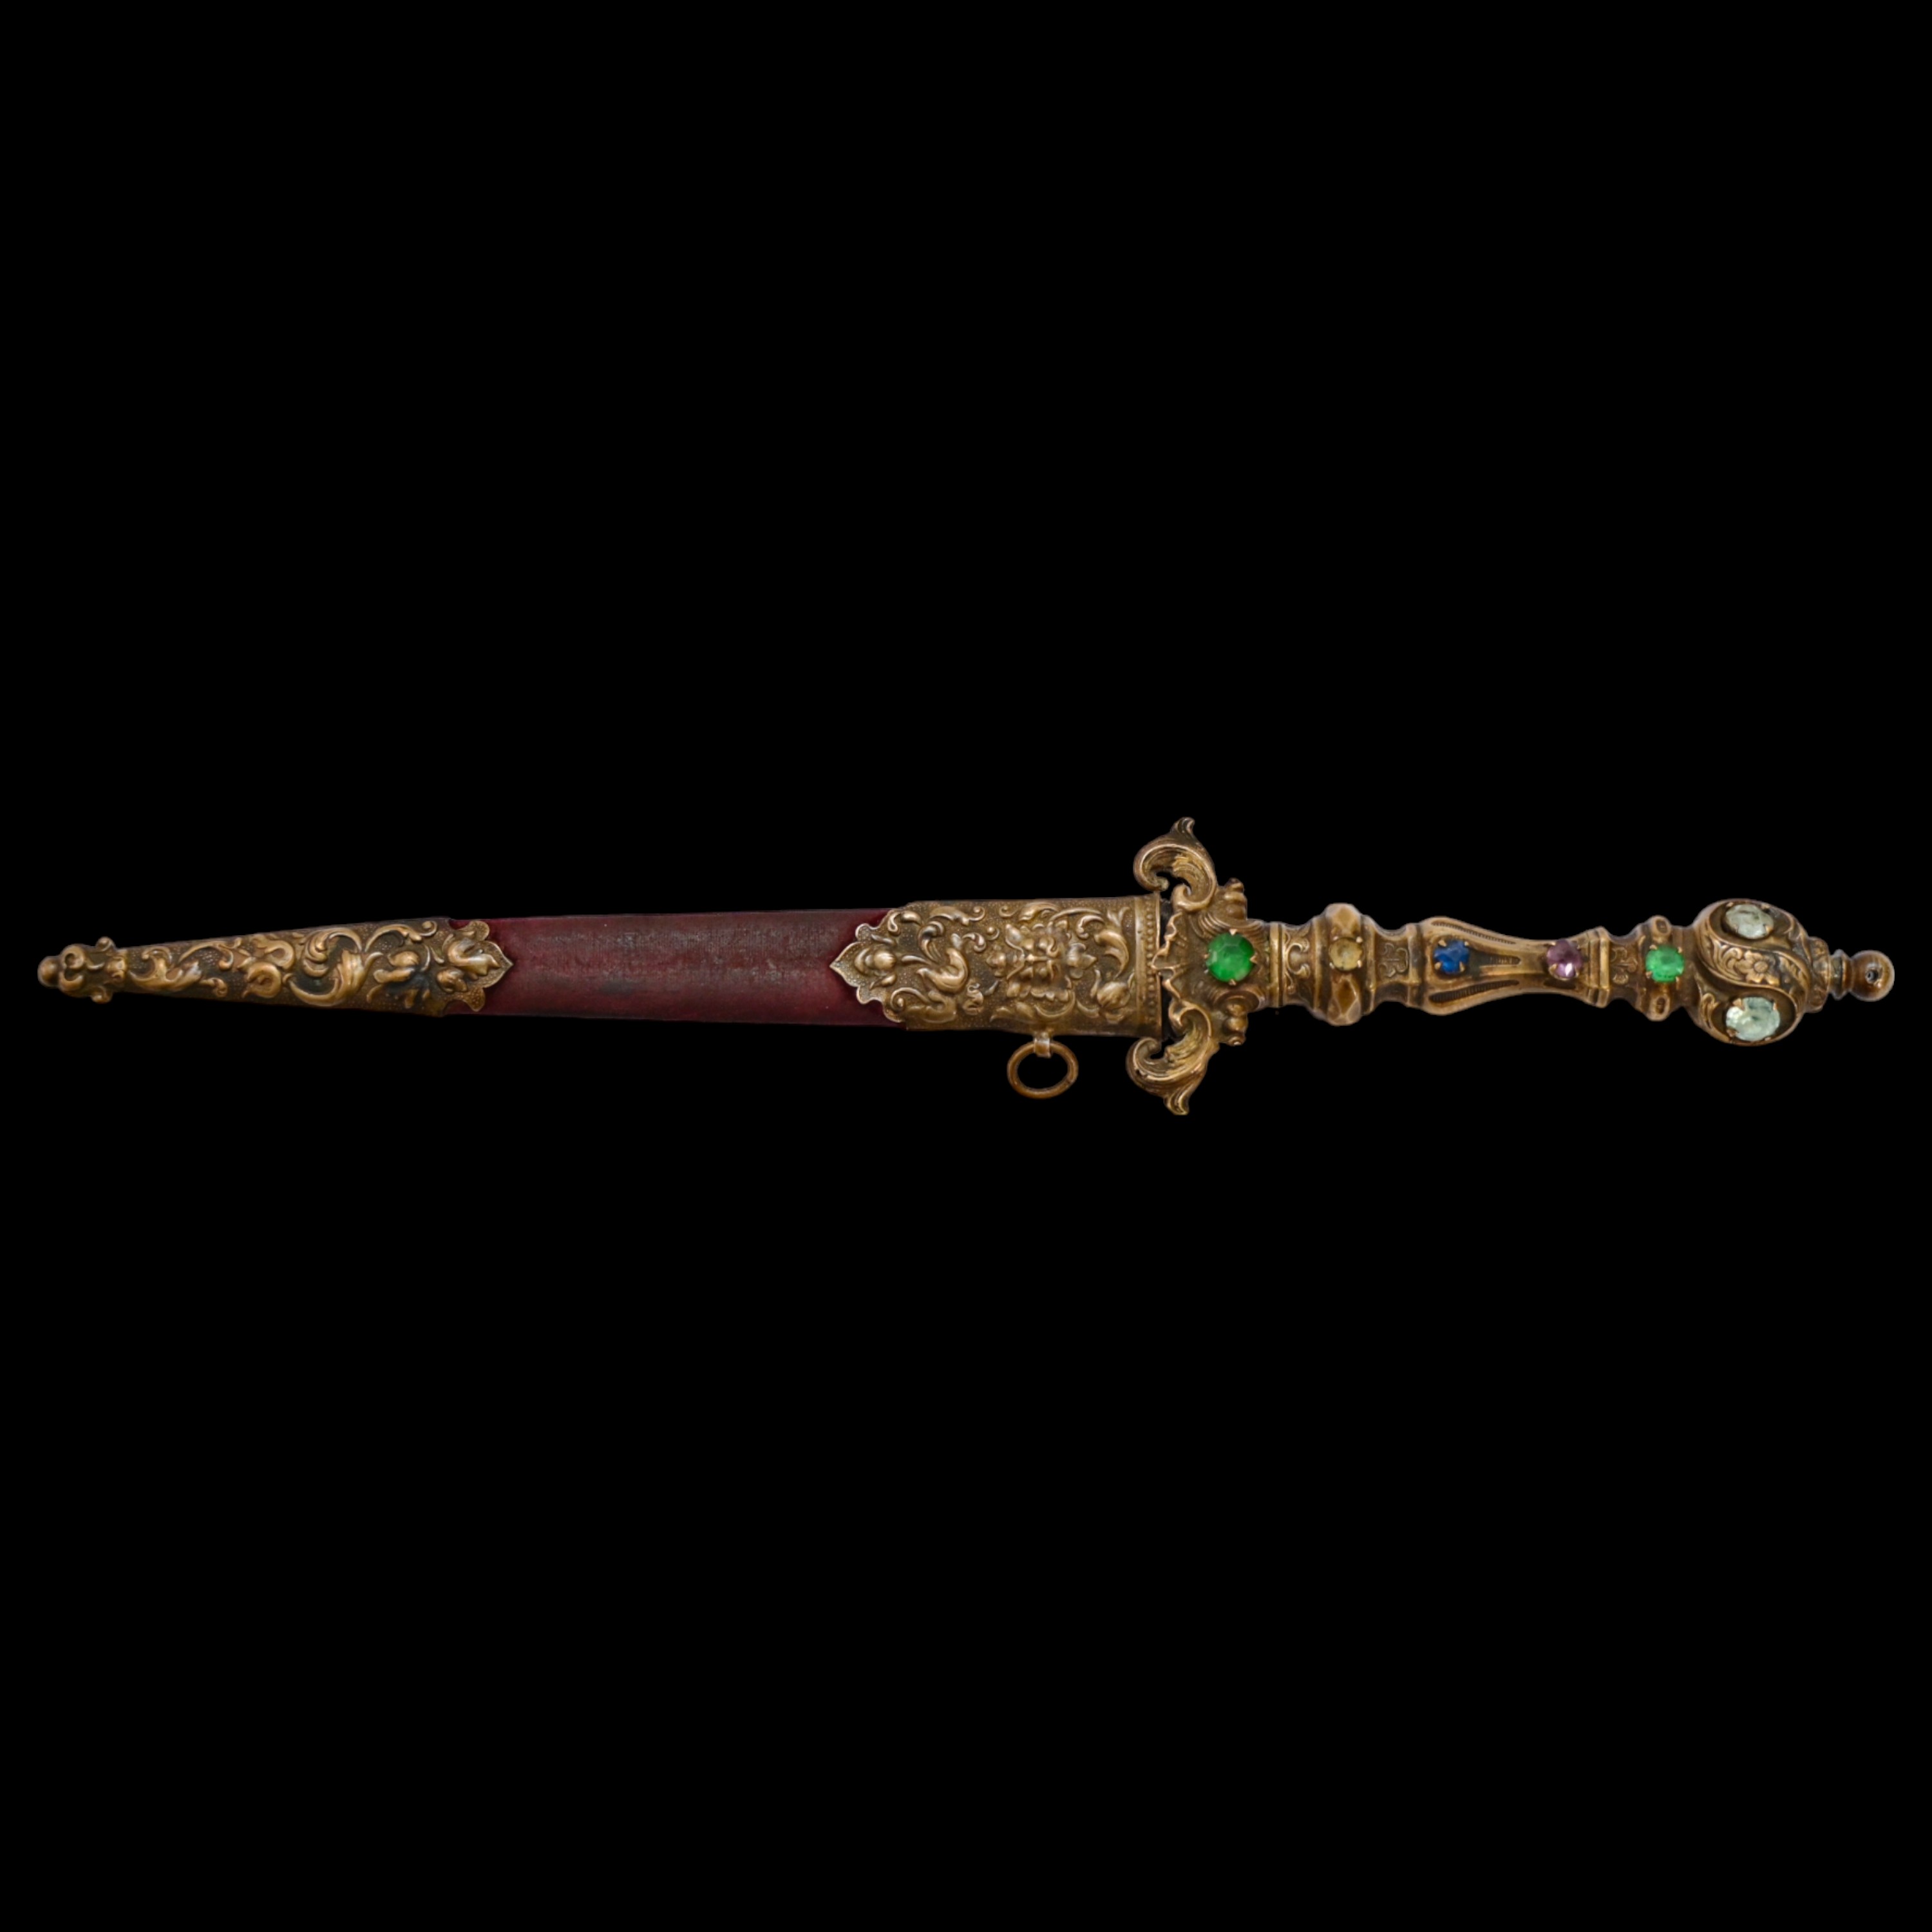 A Very high quality Dagger Renaissance Style Brass with inlaid colored stones, 19th century. - Image 2 of 9